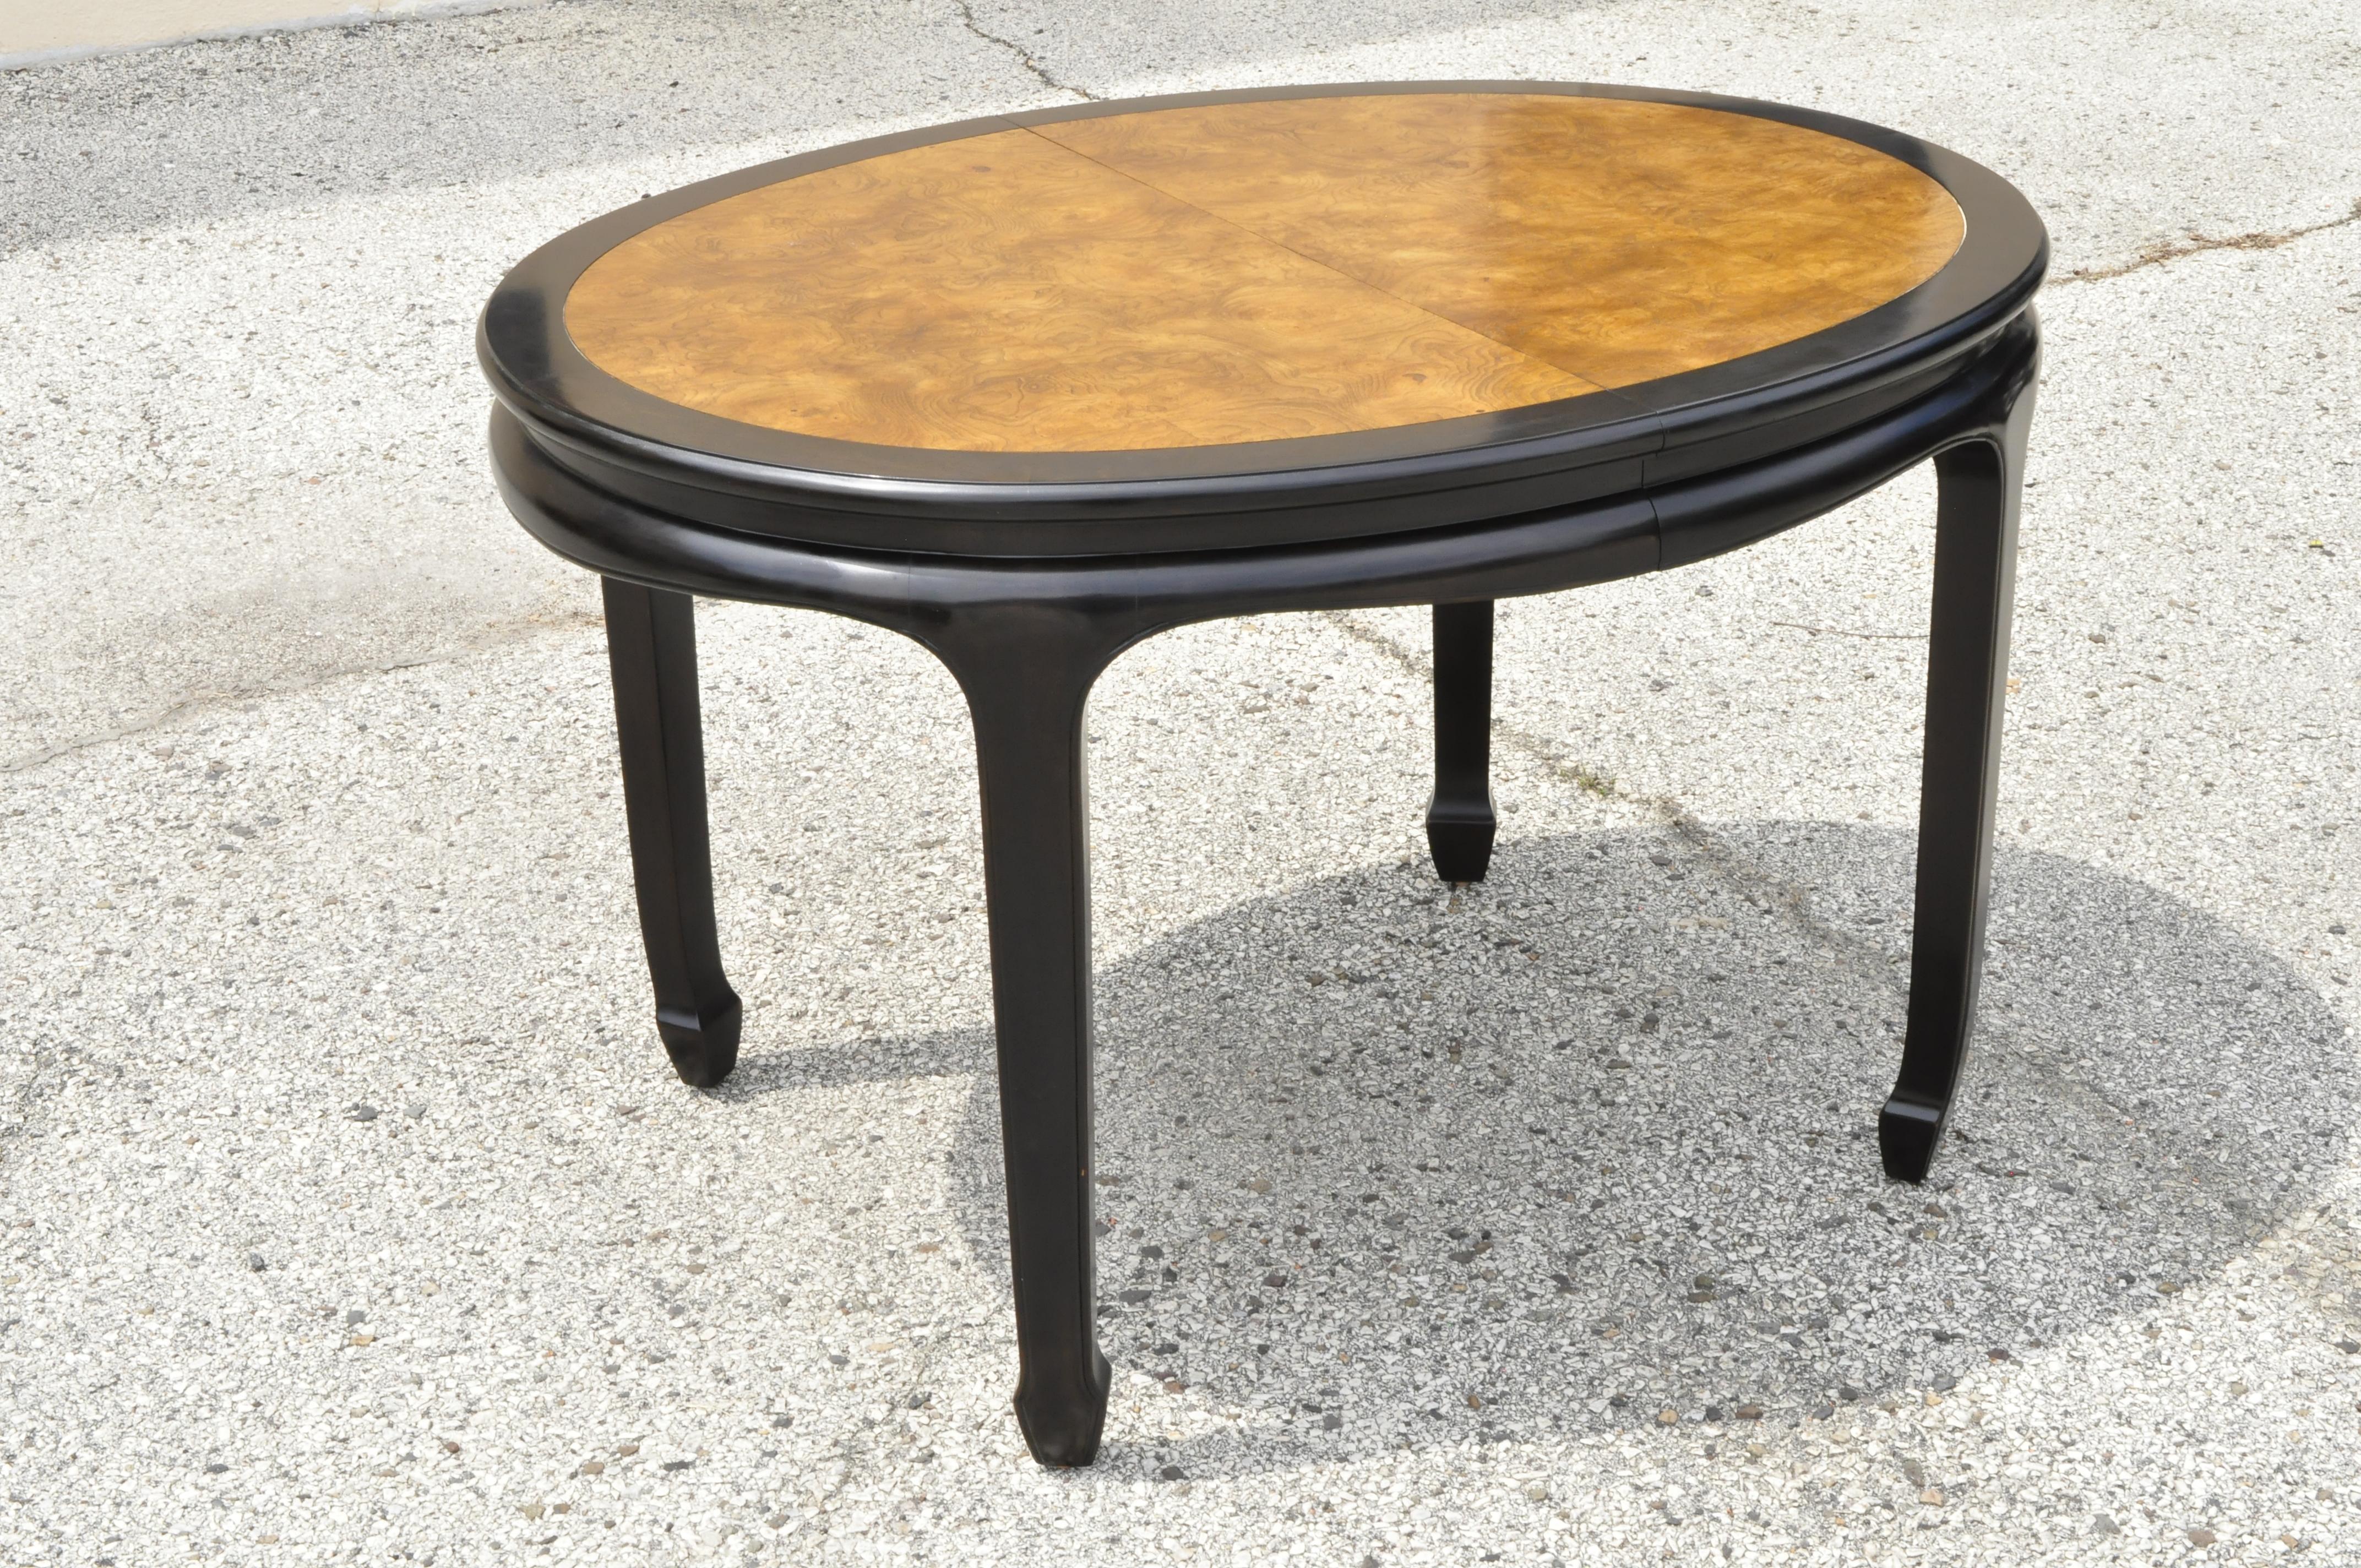 Century Furniture Chin Hua burl wood black lacquer small oval dining room table with 2 leaves. Item features (2) 18